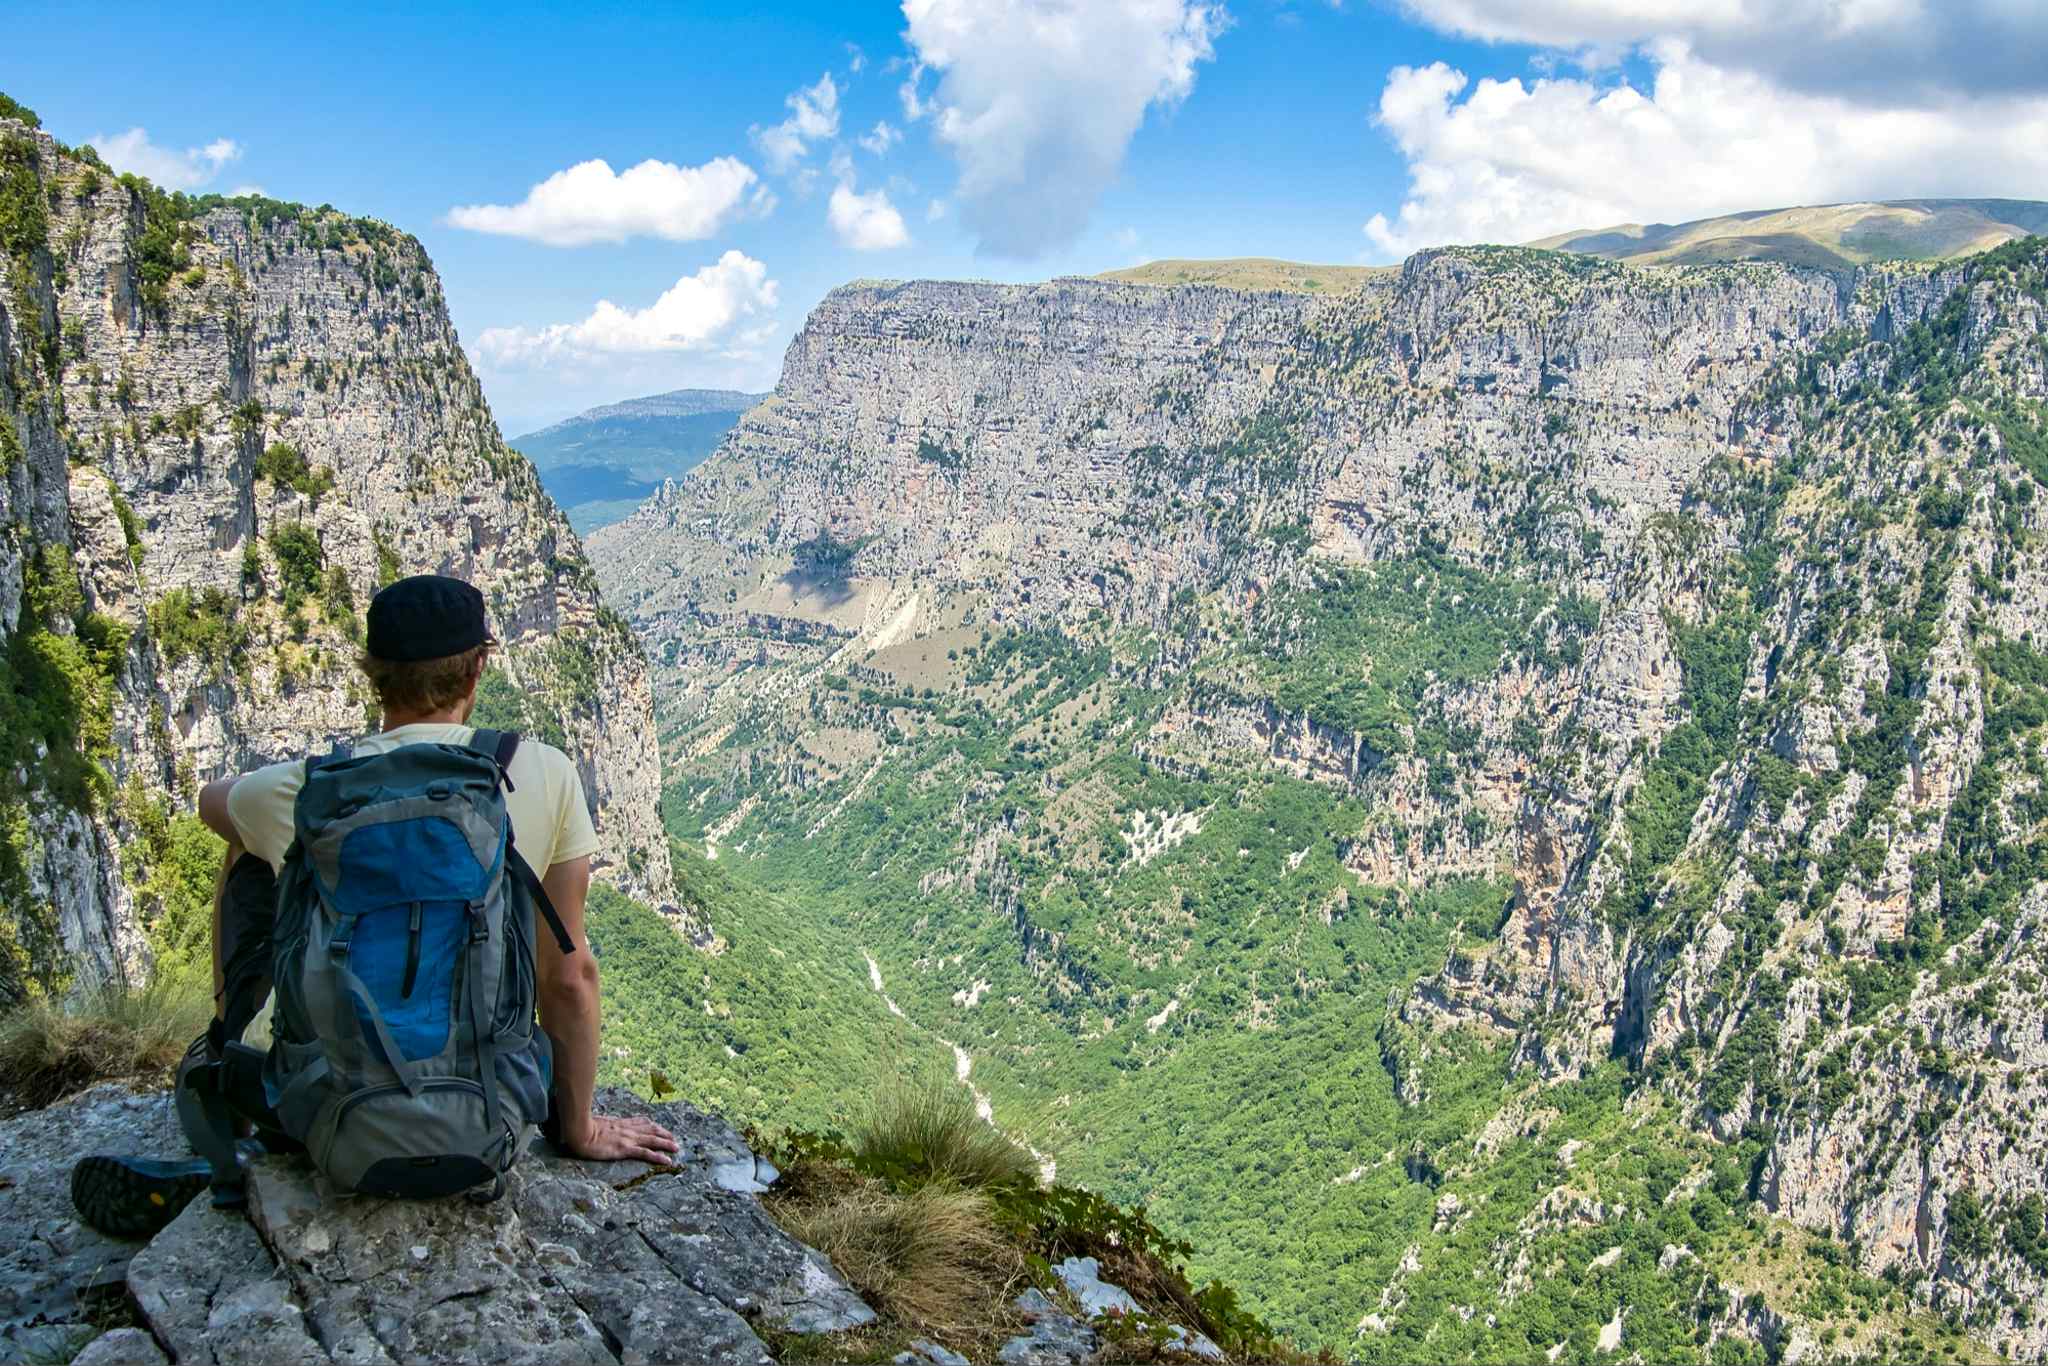 GETTY - Man at a lookout point overlooking Vikos Gorge, Greece. Photo: Getty # 1342702719